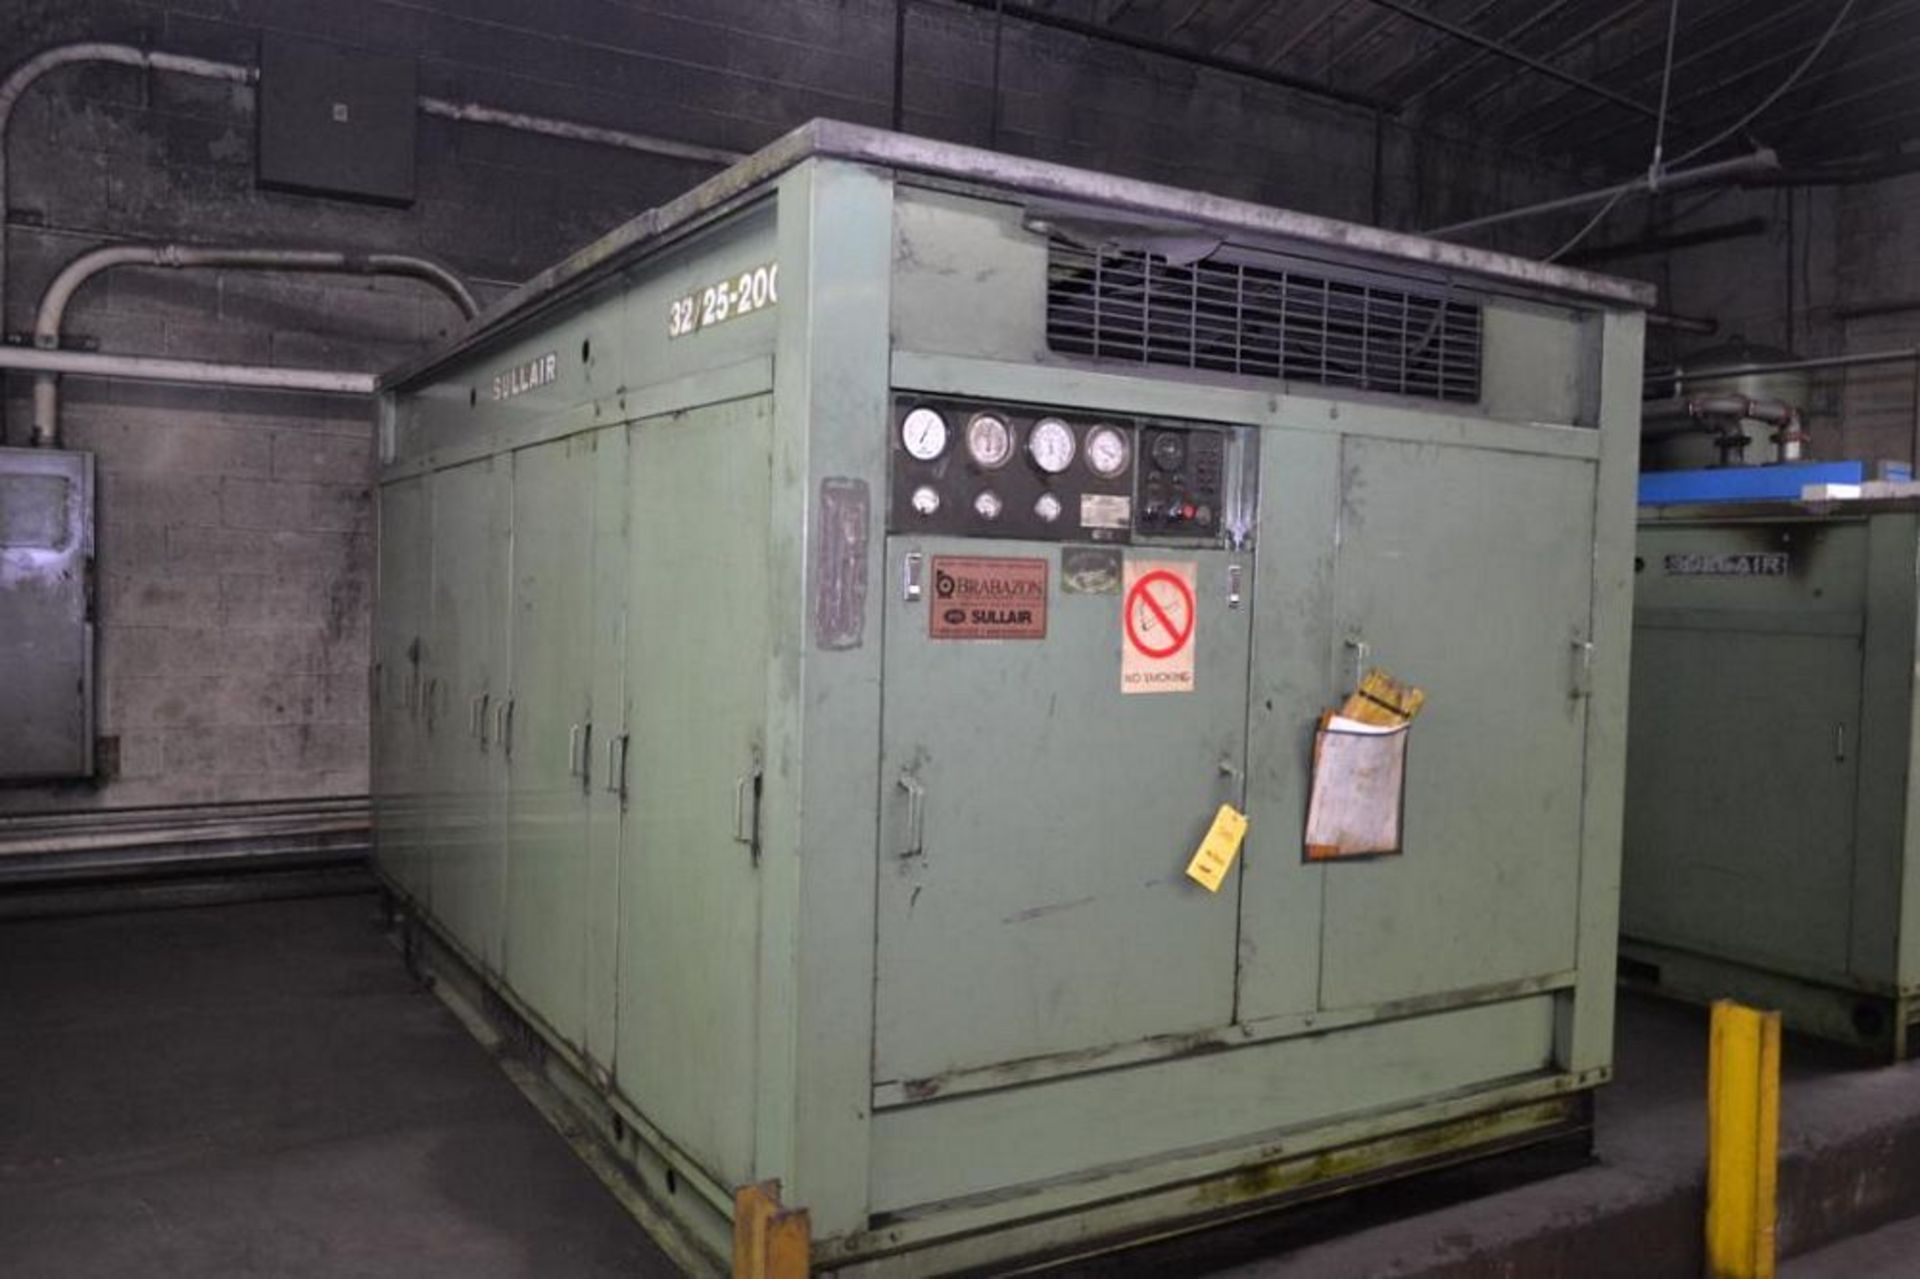 Sullair 200 HP Rotary Screw Air Compressor Model 32/25-200LACAC, S/N 003-76260 (48,790 hours)